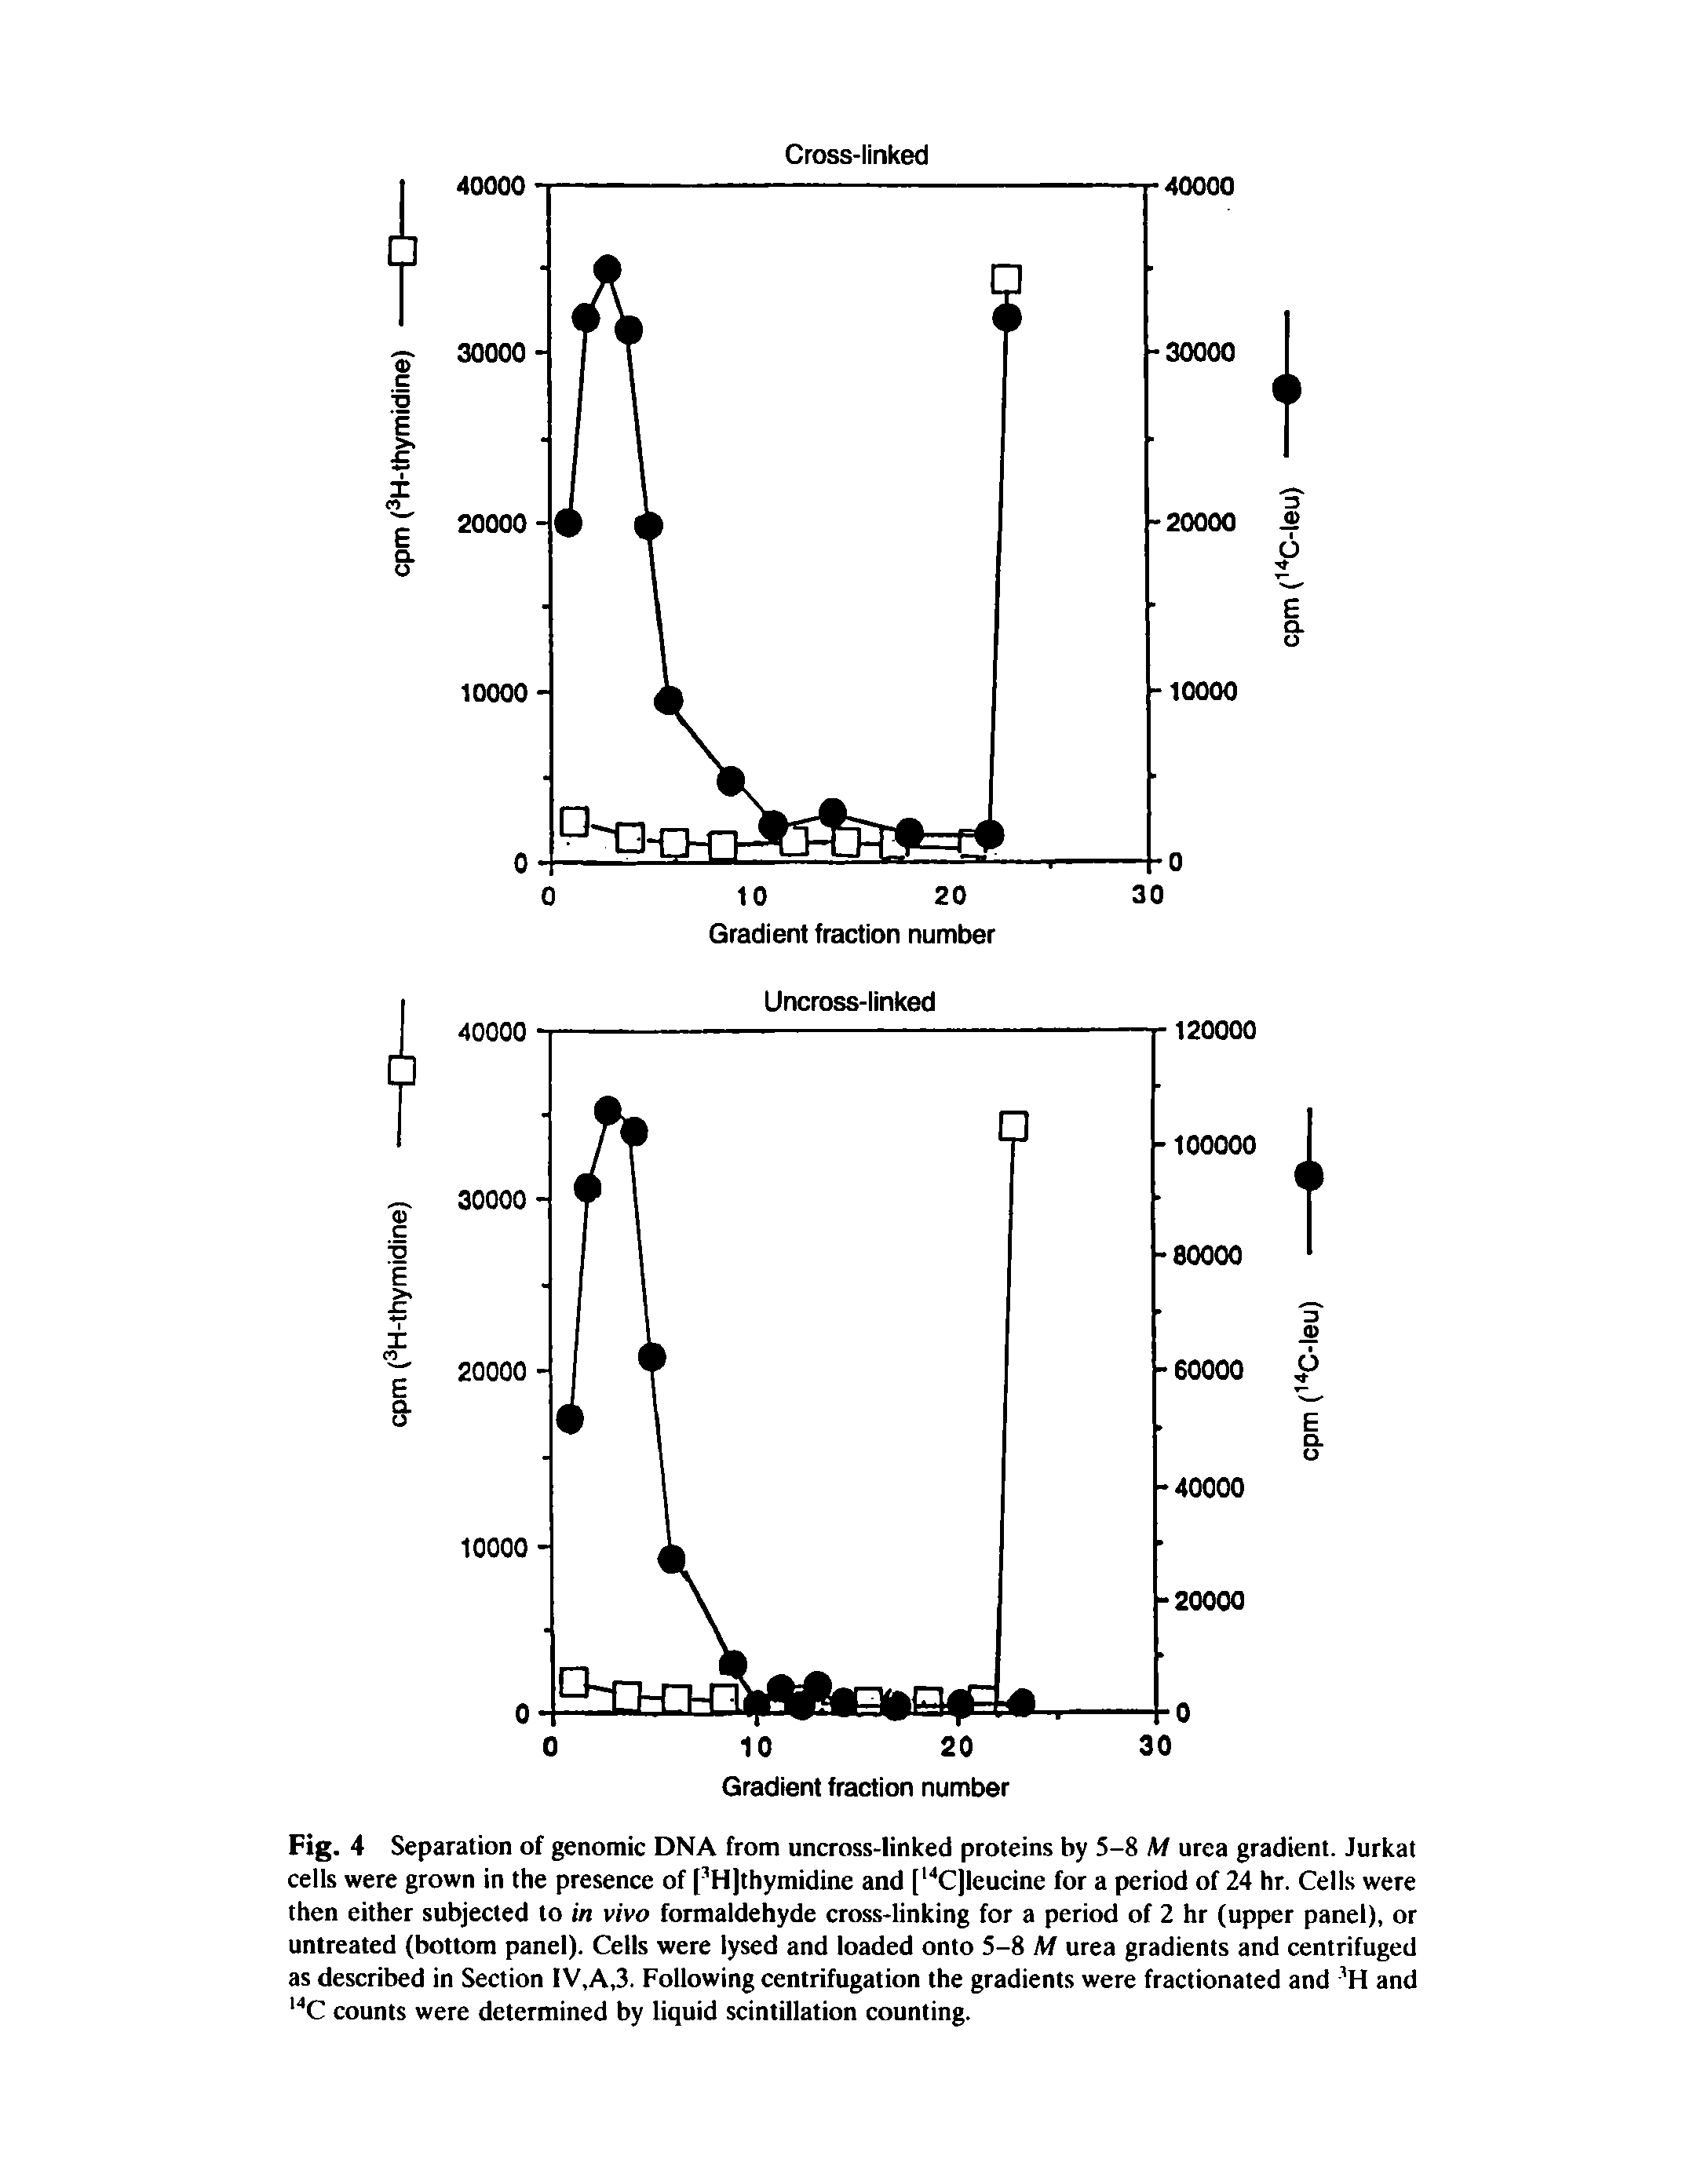 Fig. 4 Separation of genomic DNA from uncross-linked proteins by 5-8 M urea gradient. Jurkat cells were grown in the presence of pHJthymidine and [ CJIeucine for a period of 24 hr. Cells were then either subjected to in vivo formaldehyde cross-linking for a period of 2 hr (upper panel), or untreated (bottom panel). Cells were lysed and loaded onto 5-8 M urea gradients and centrifuged as described in Section IV,A,3. Following centrifugation the gradients were fractionated and H and C counts were determined by liquid scintillation counting.